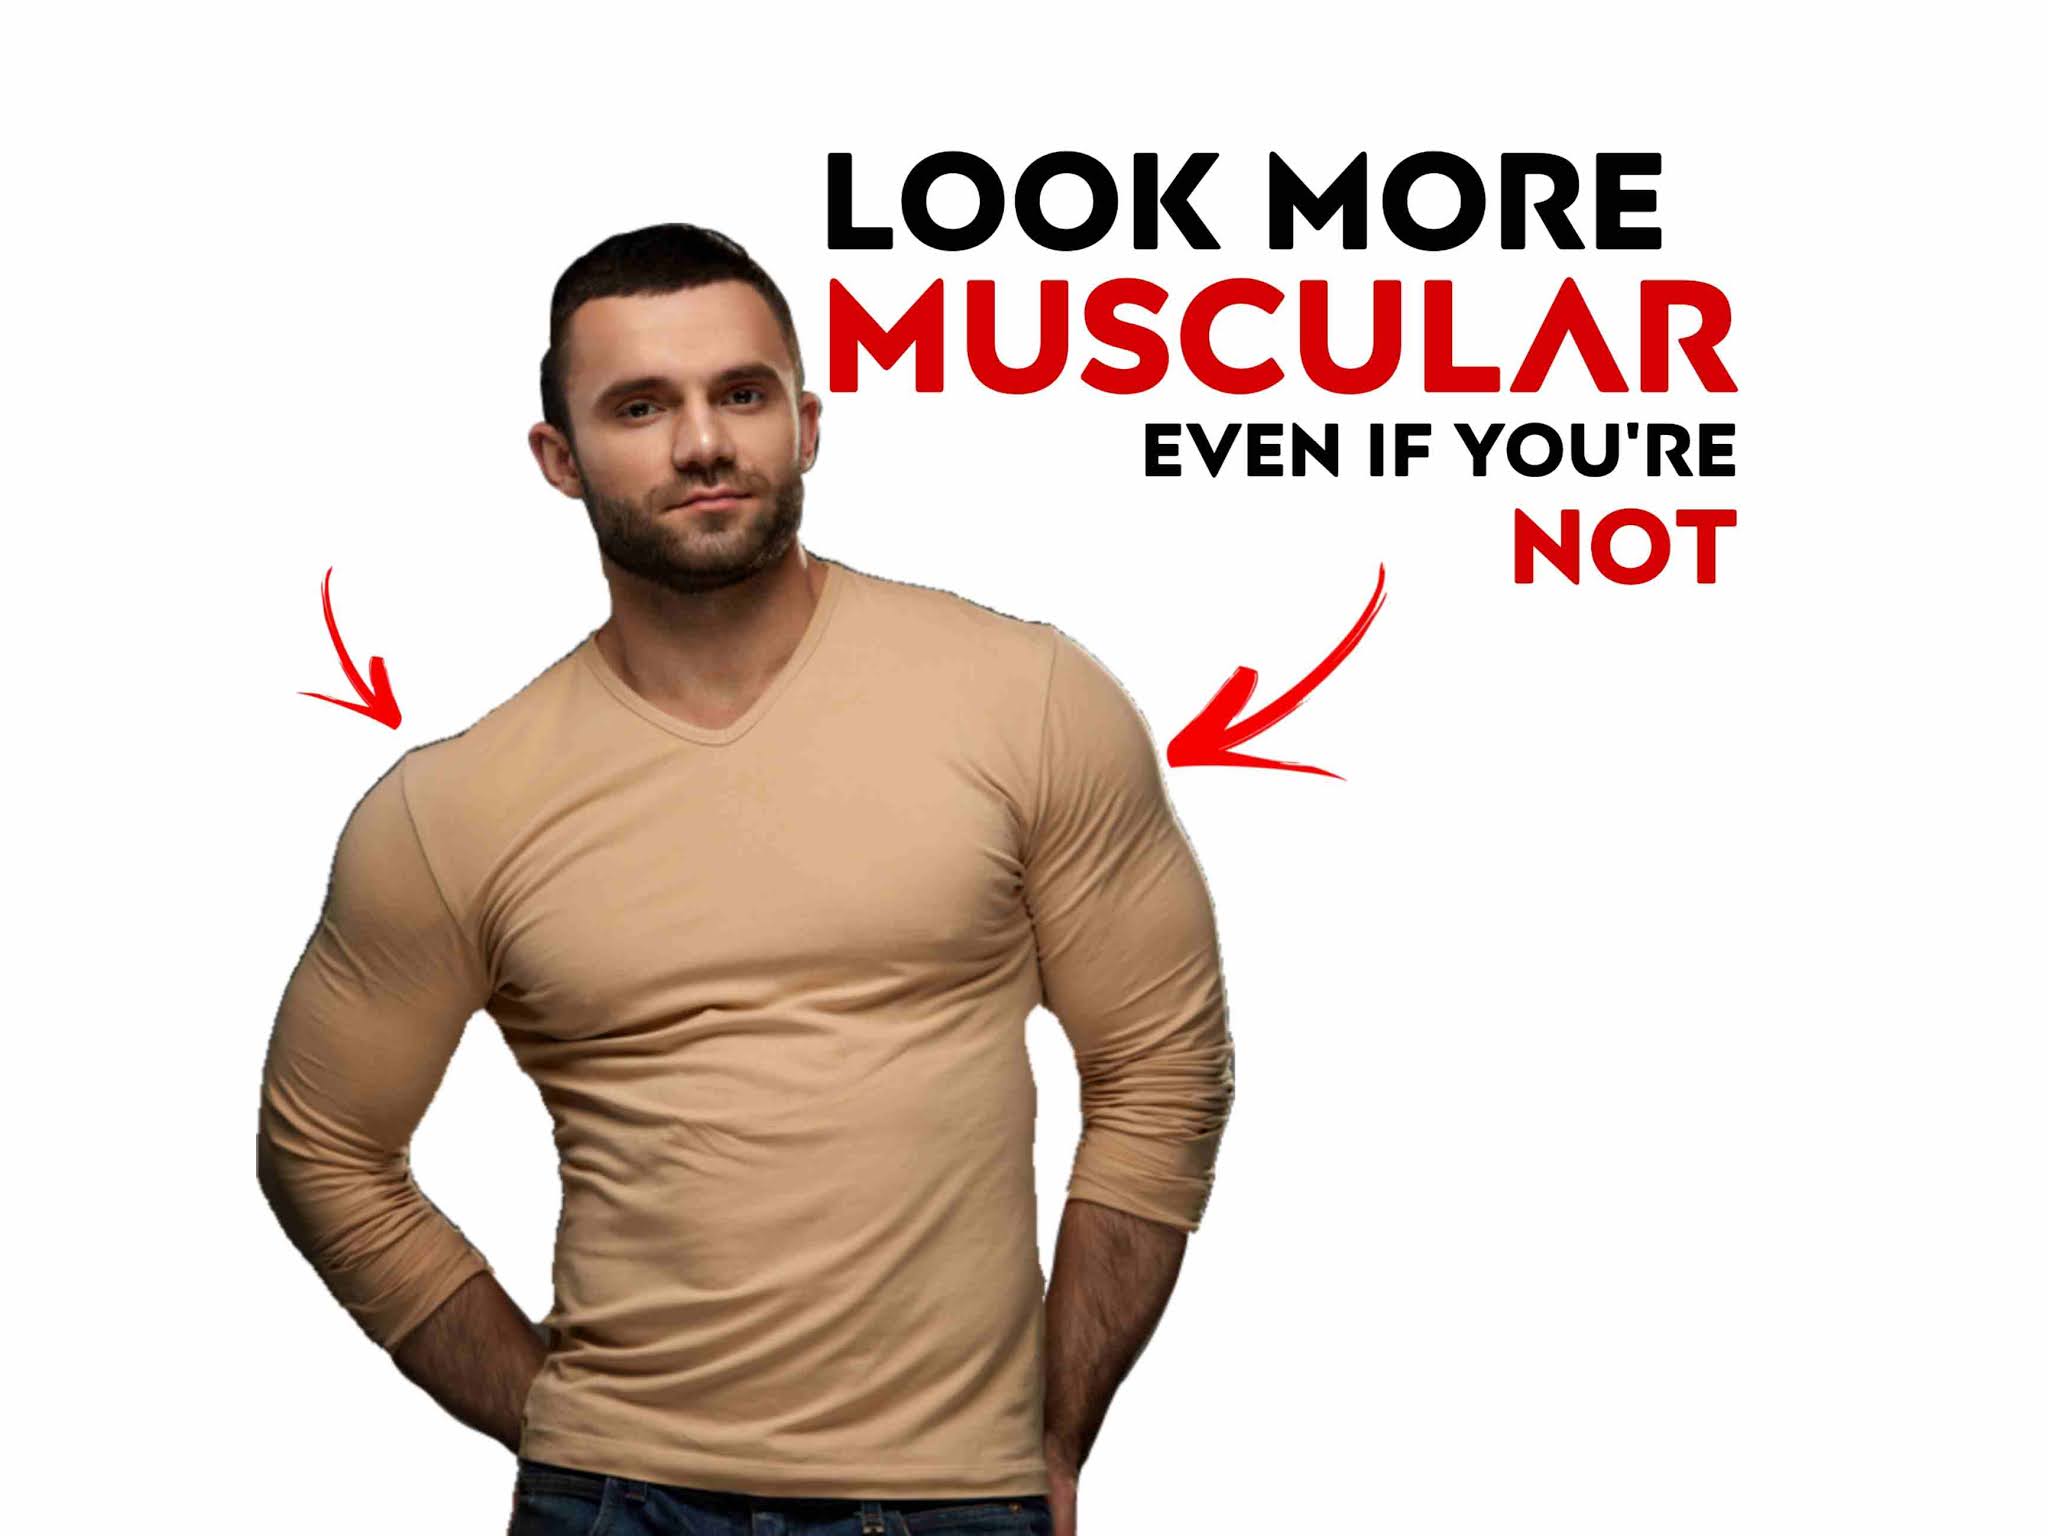 4 Simple Steps To Look More Muscular! ( Even If You're Not